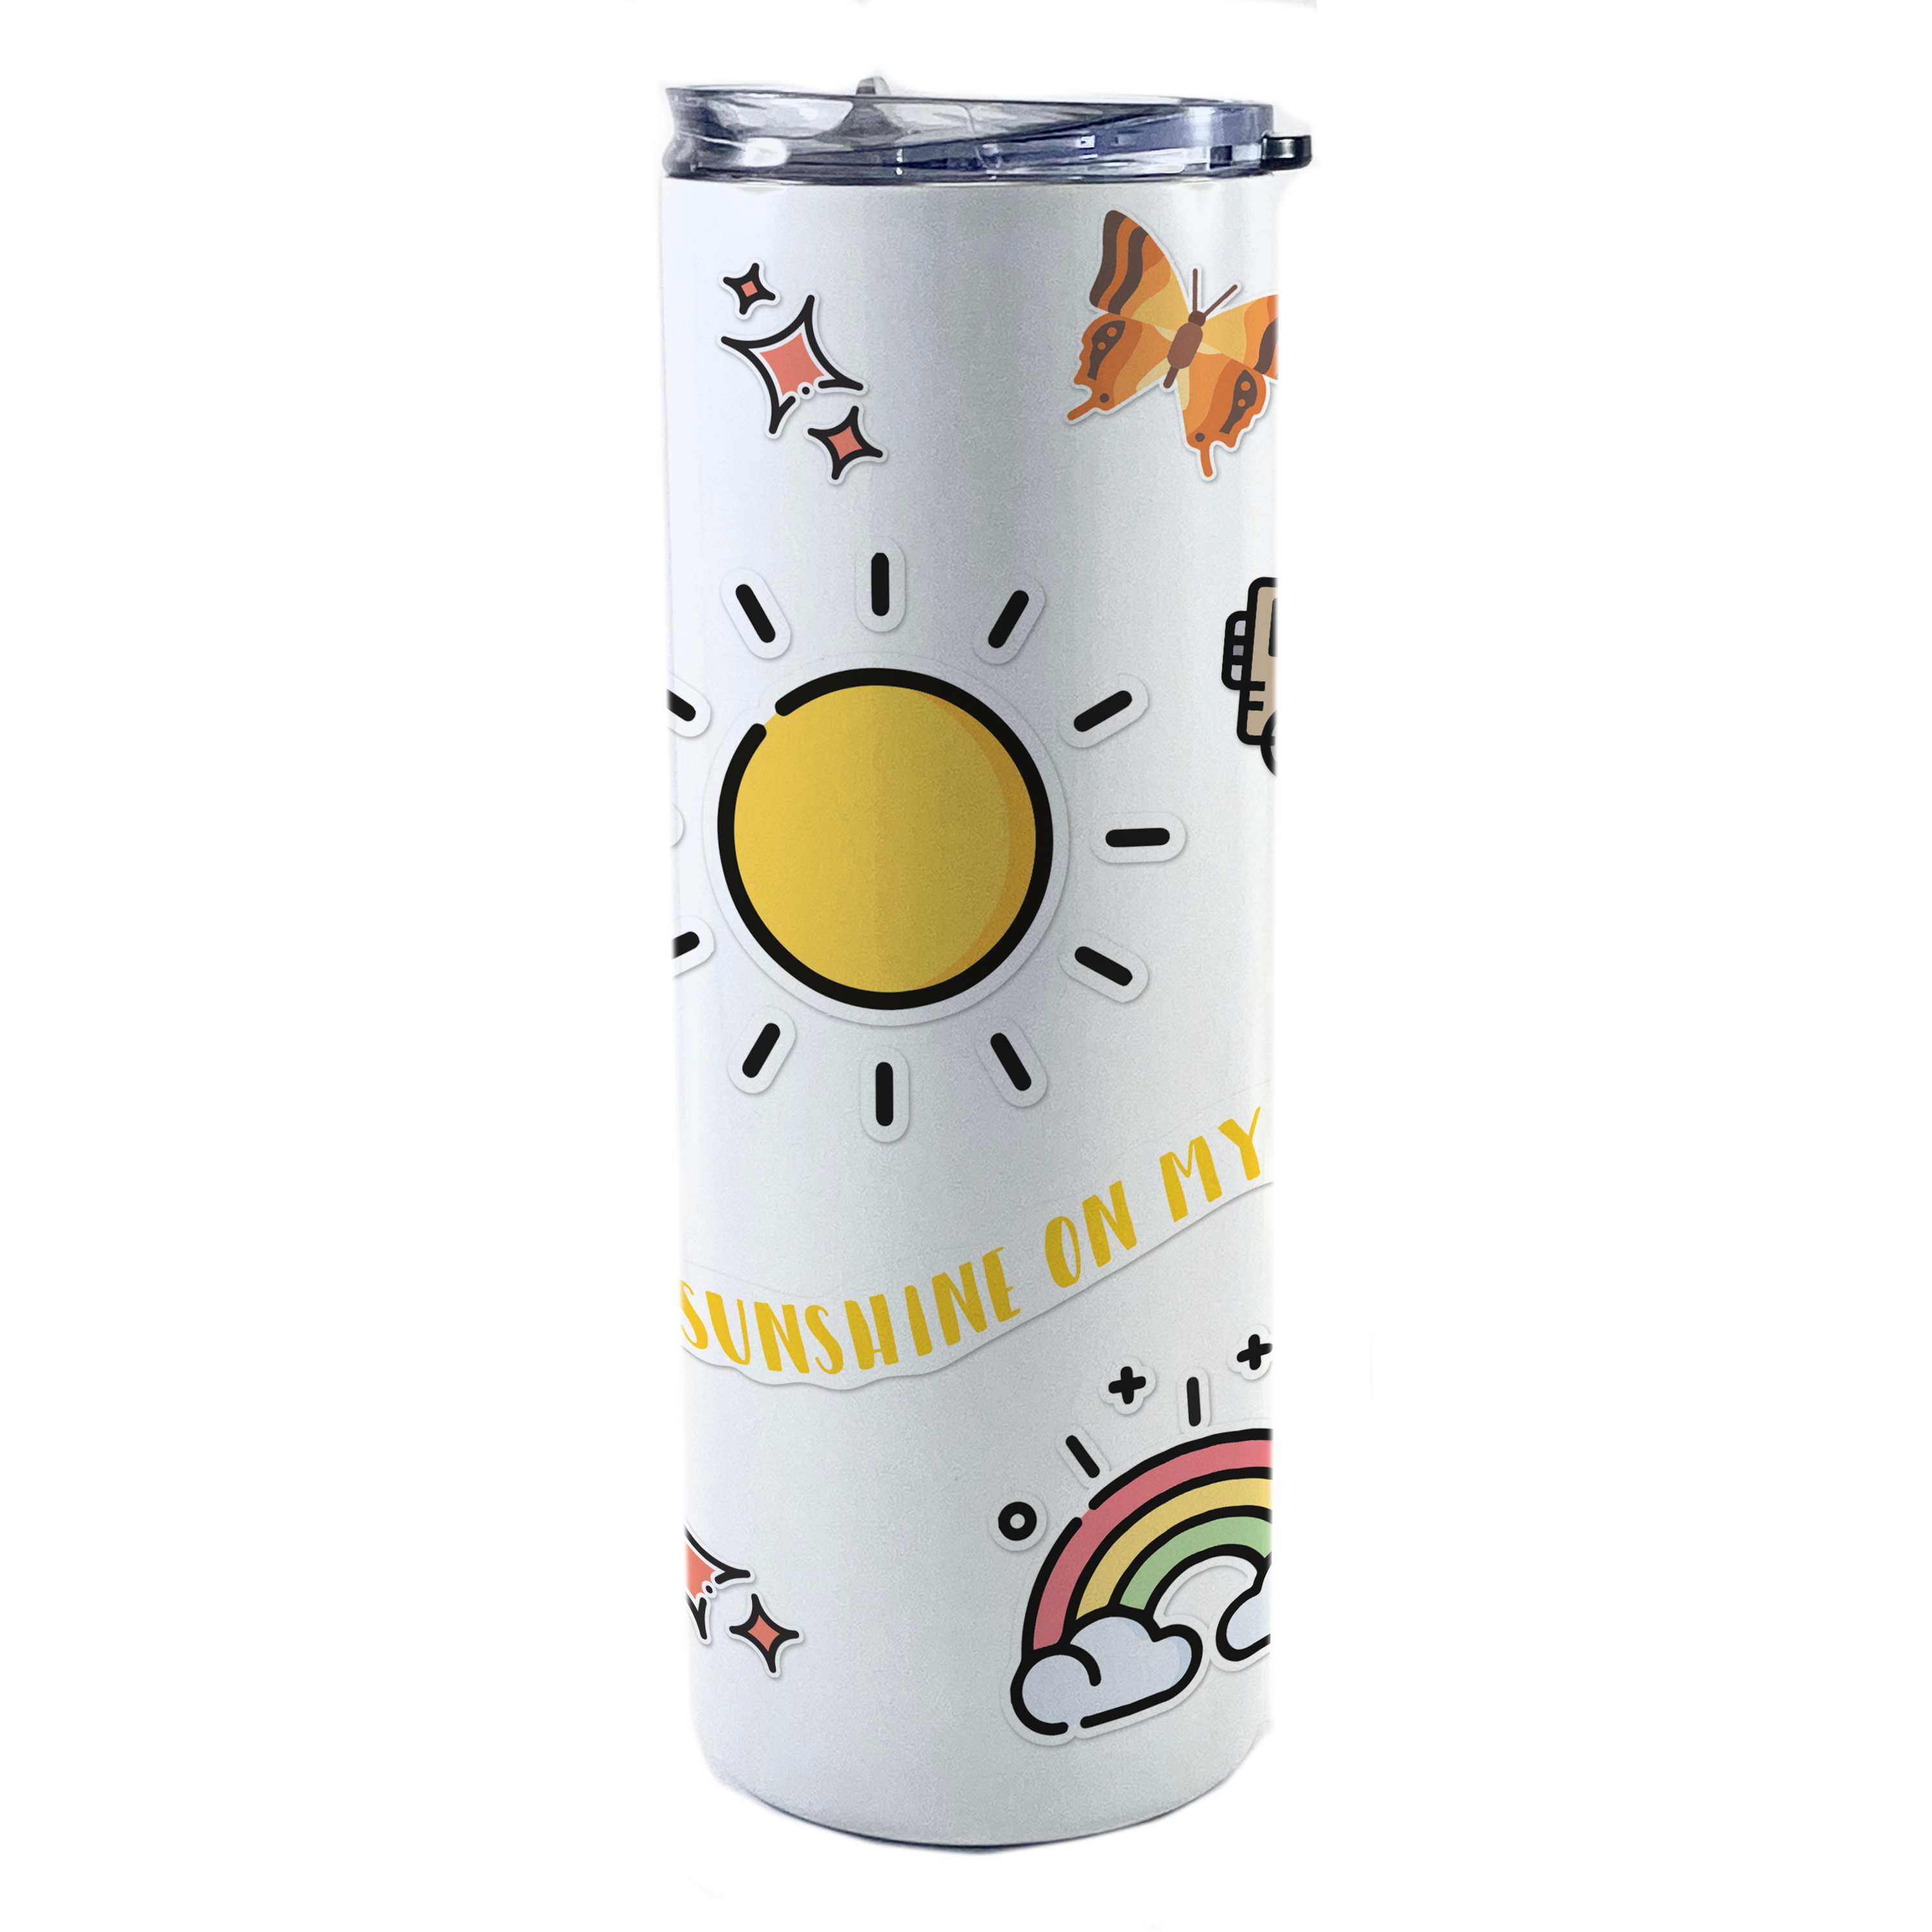 Trend Setters Originals (Sunshine On My Mind) 20 Oz Stainless Steel Travel Tumbler with Straw